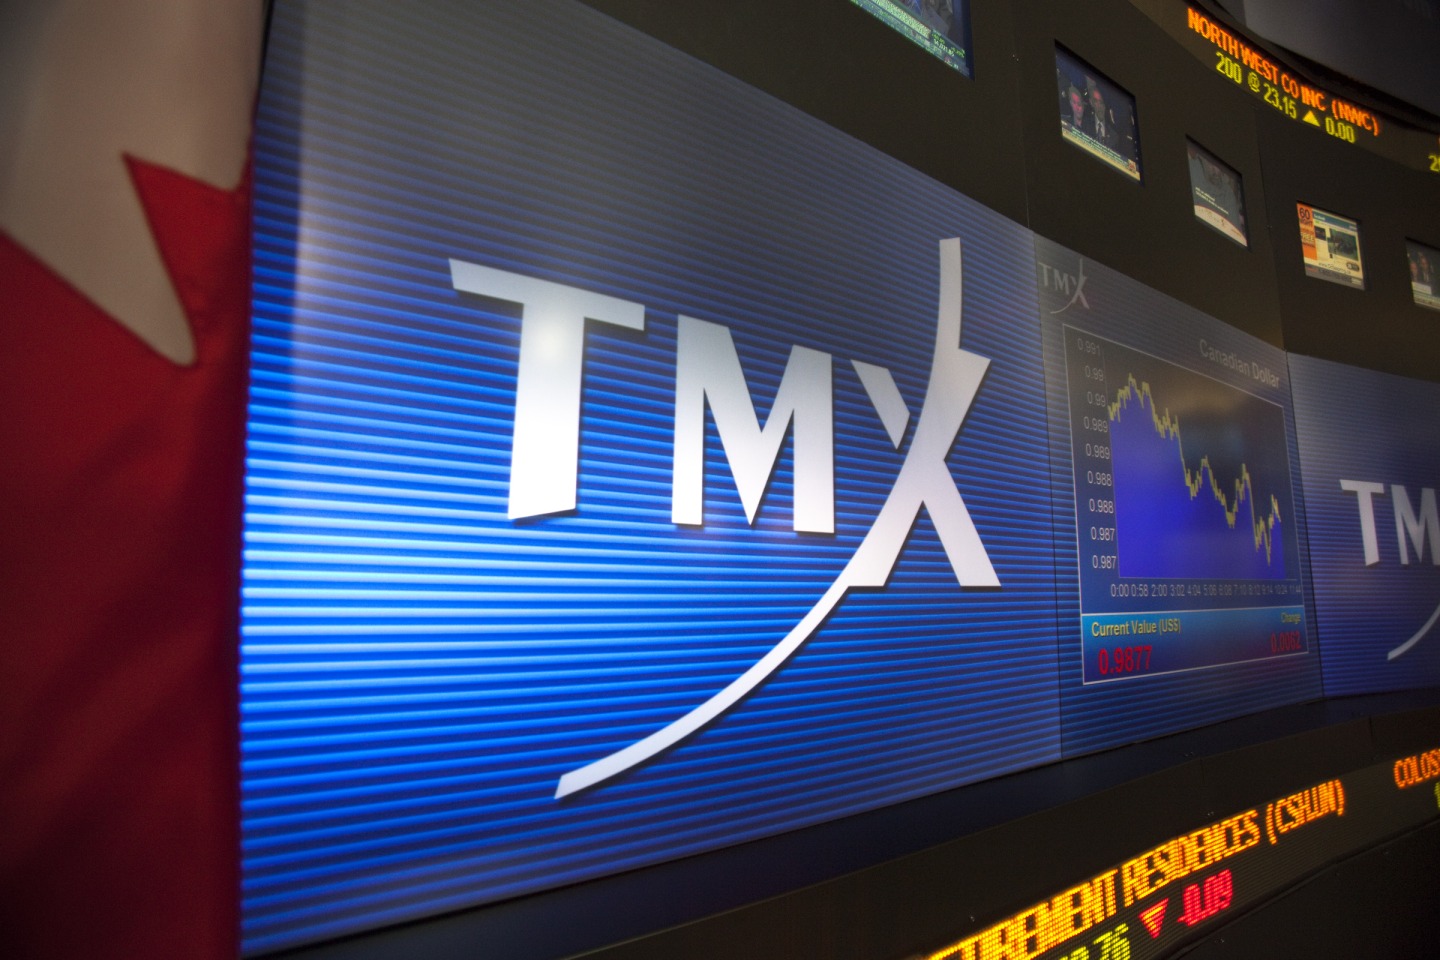 TMX Group Inc. signage and stock prices are displayed on a screen in the broadcast center of the Toronto Stock Exchange (TSX) in Toronto, Ontario, Canada, on Tuesday, Feb. 19, 2013. Canadian stocks rose for the first time in four days, led by gains among banks, after a measure showing an increase in German investor confidence added to signs of a European economic recovery.